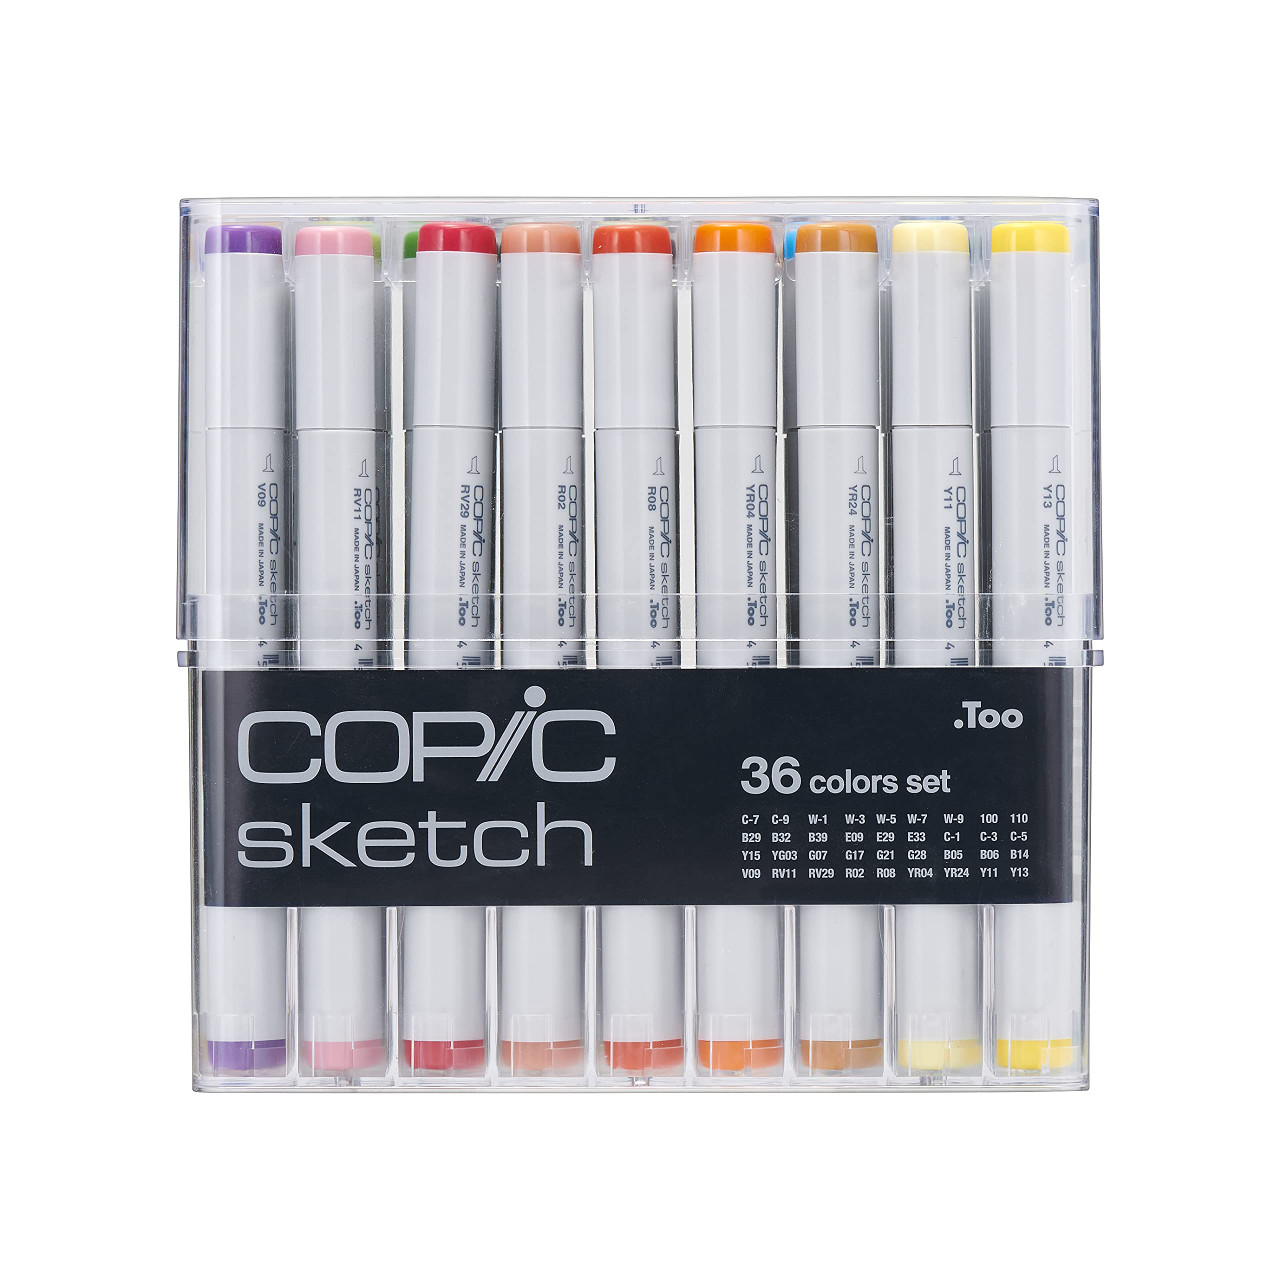 Copic Pale Pastels Alcohol Sketch Brush Markers Set of 6, Brand